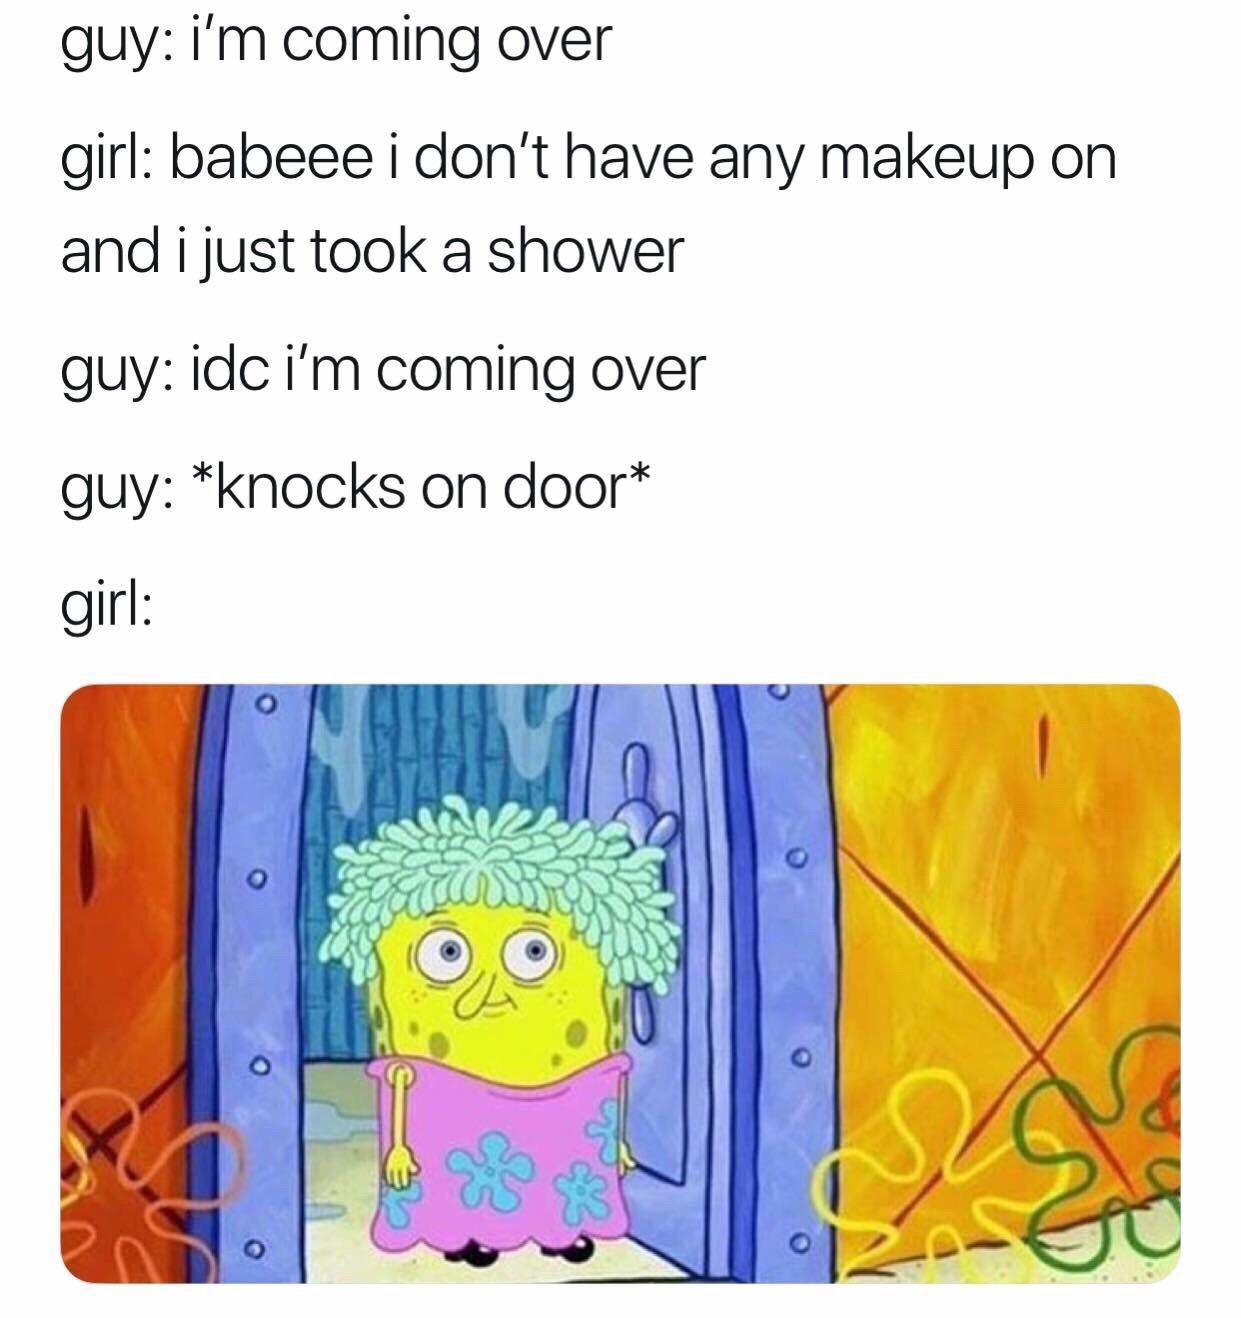 spongebob no makeup - guy i'm coming over girl babeee i don't have any makeup on and i just took a shower guy idc i'm coming over guy knocks on door girl